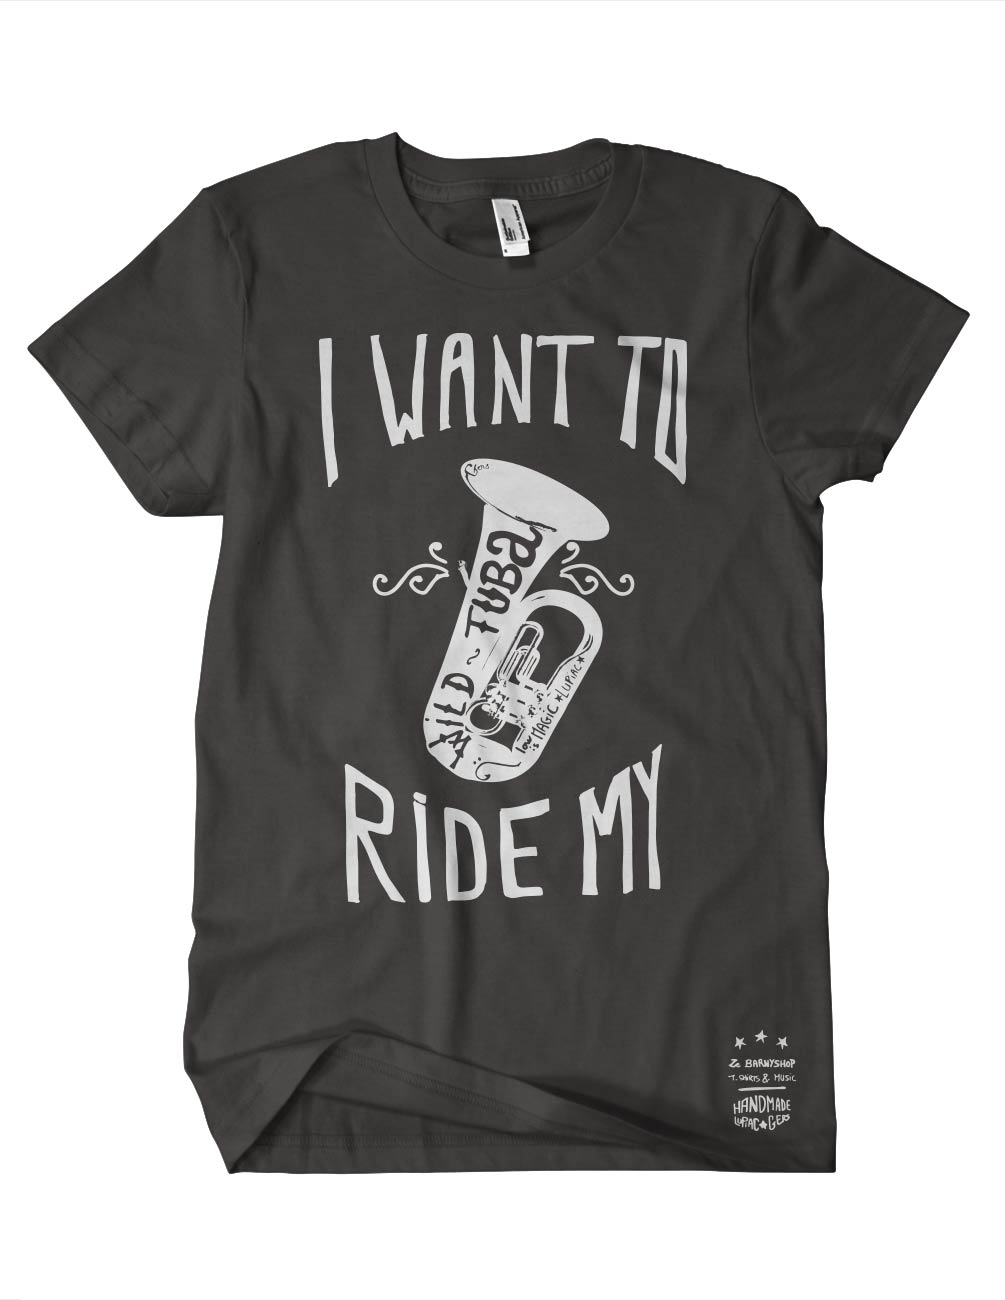 I-want-to-ride-noir